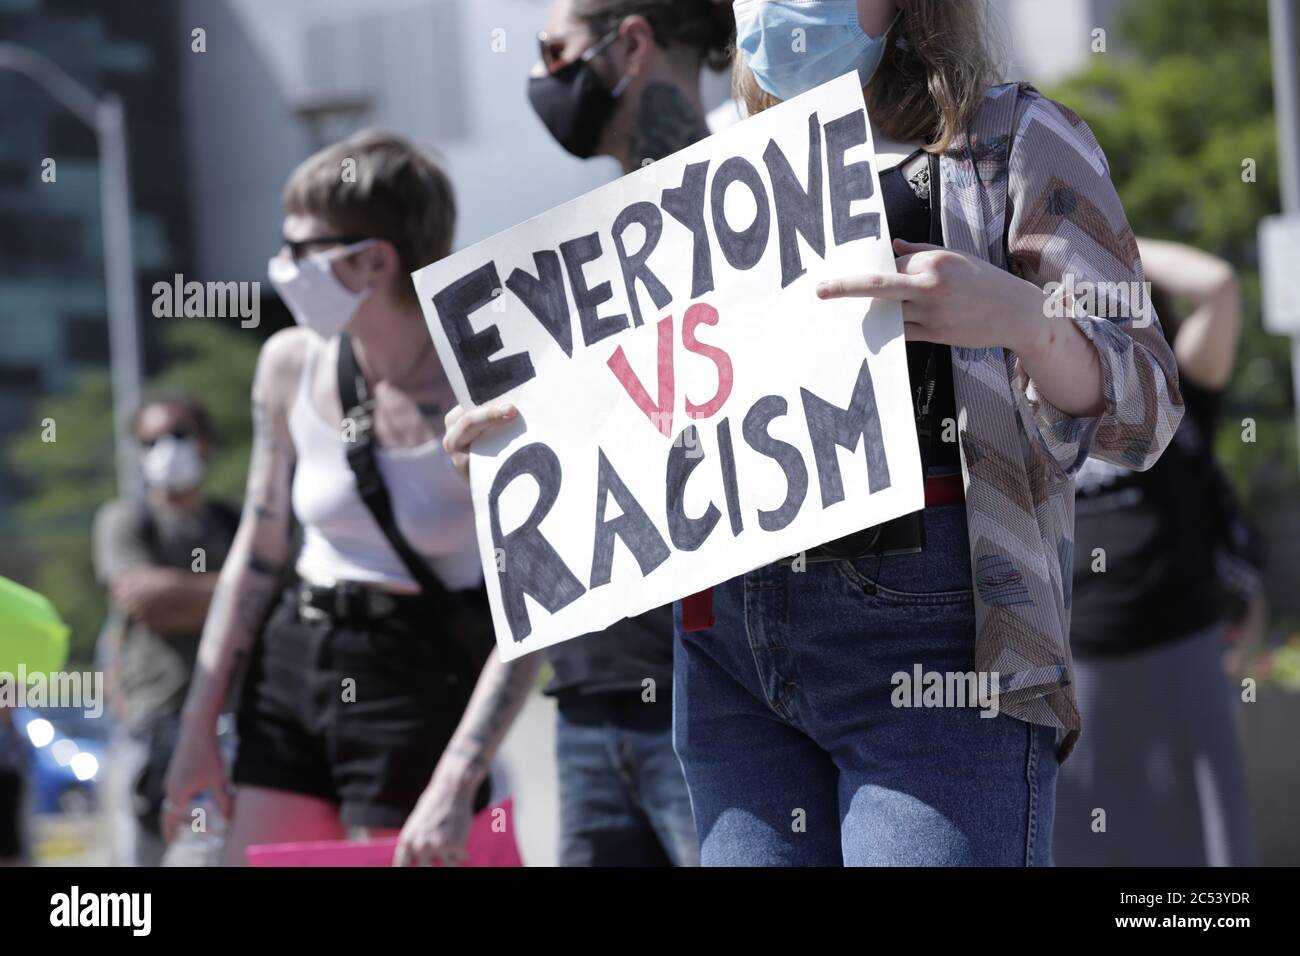 A young woman seen holding up a placard saying Everyone Against Racism, during a Black Lives Matter protest at the Hamilton City Hall Stock Photo